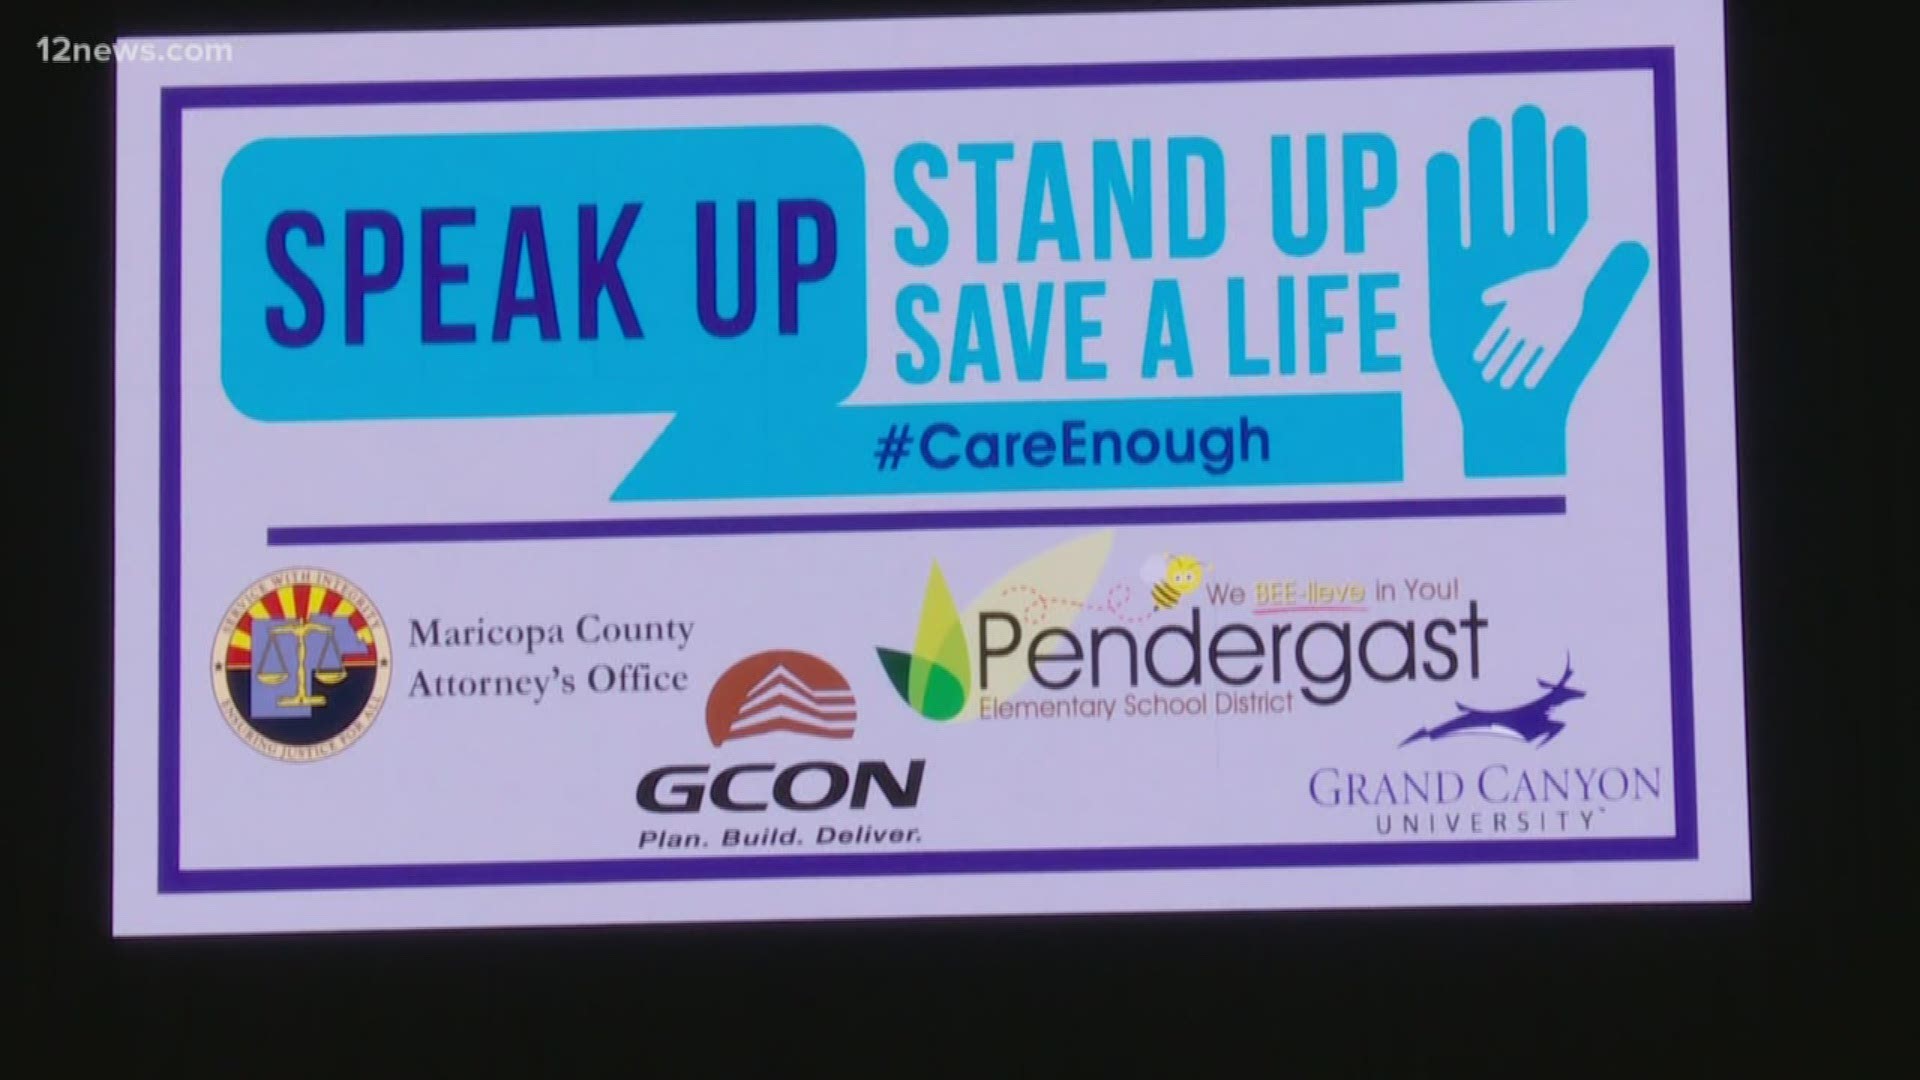 GCU arena will play host to the "Speak Up, Stand Up, Save A Life" conference Tuesday. Jen Wahl has the details.